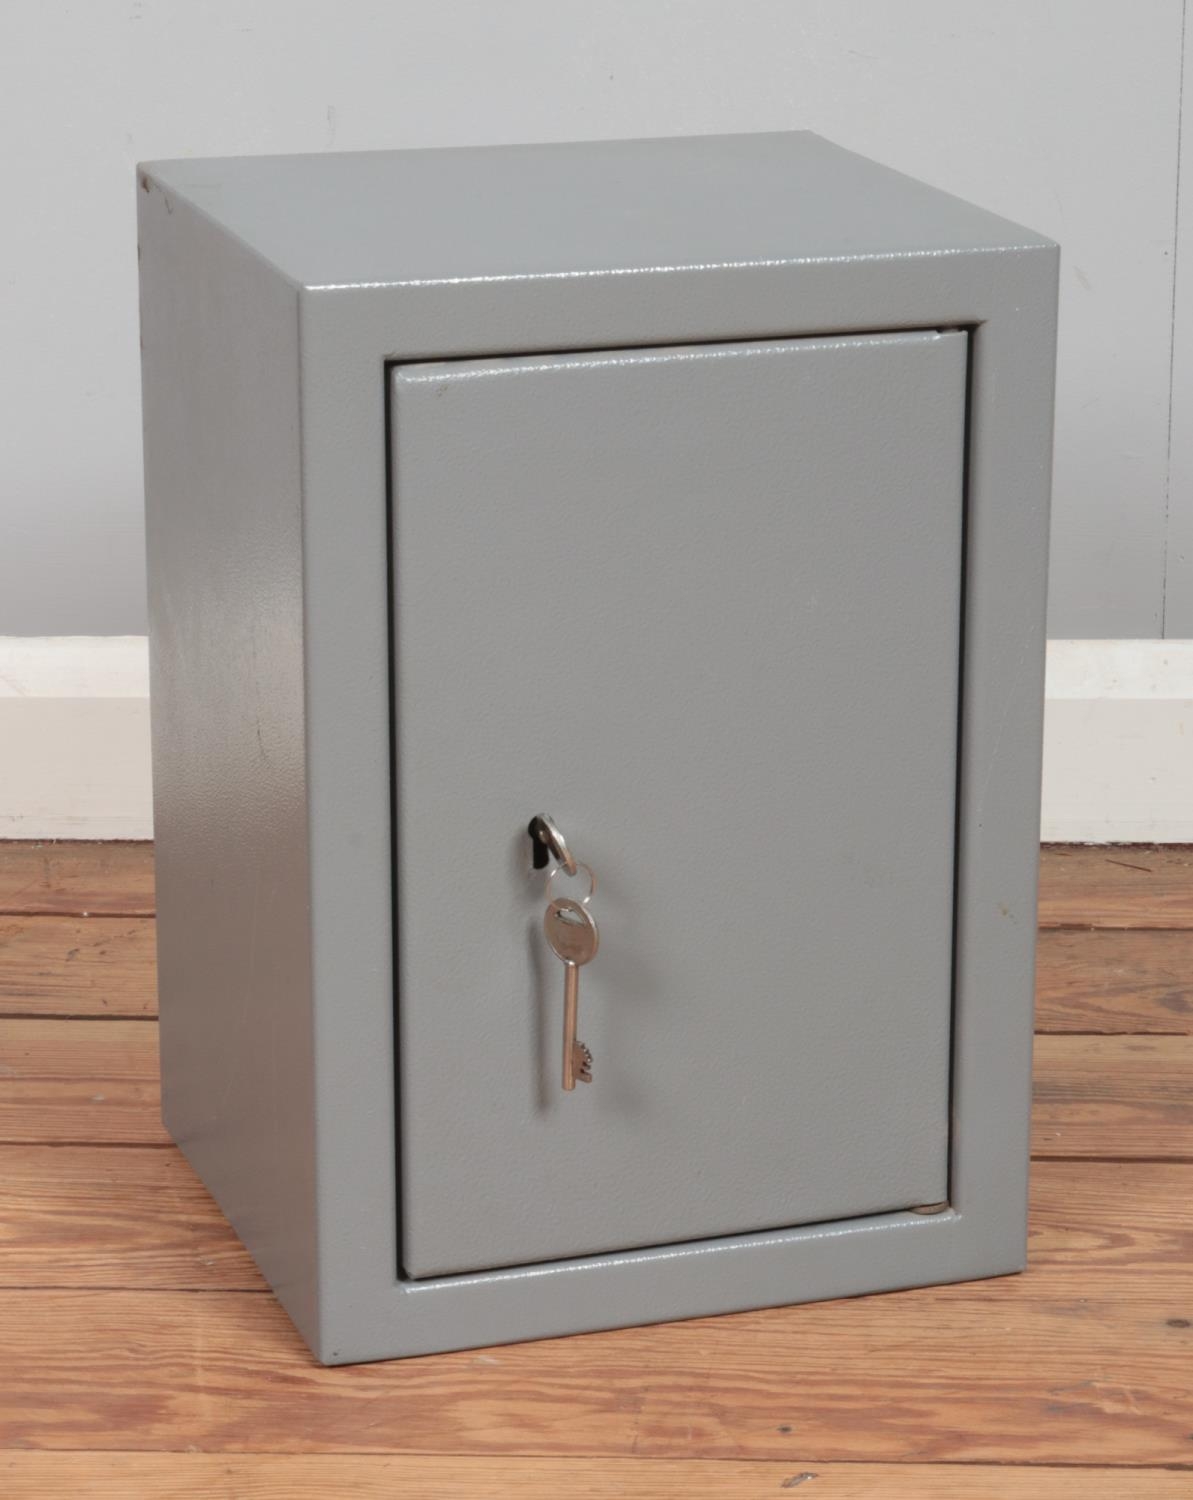 A Brattonsound engineering hand gun safe with two keys and wall fixing holes to reverse. Approx.